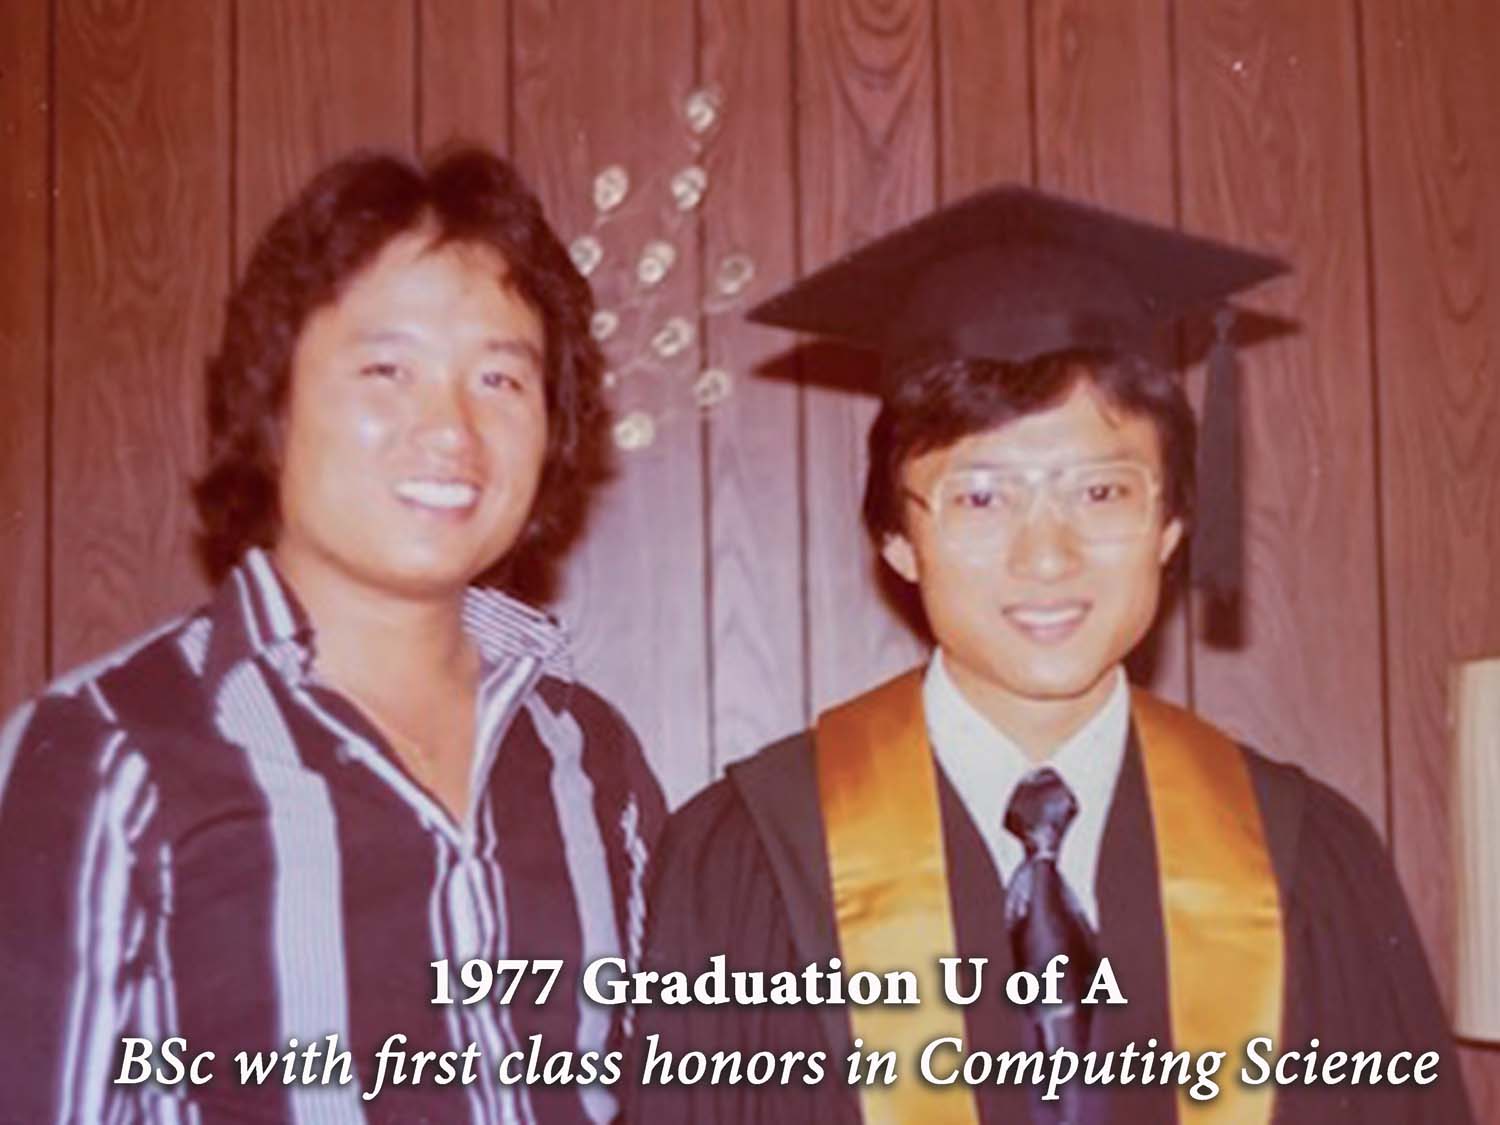 Roger's U of A graduation in 1977 - With eldest brother Alex